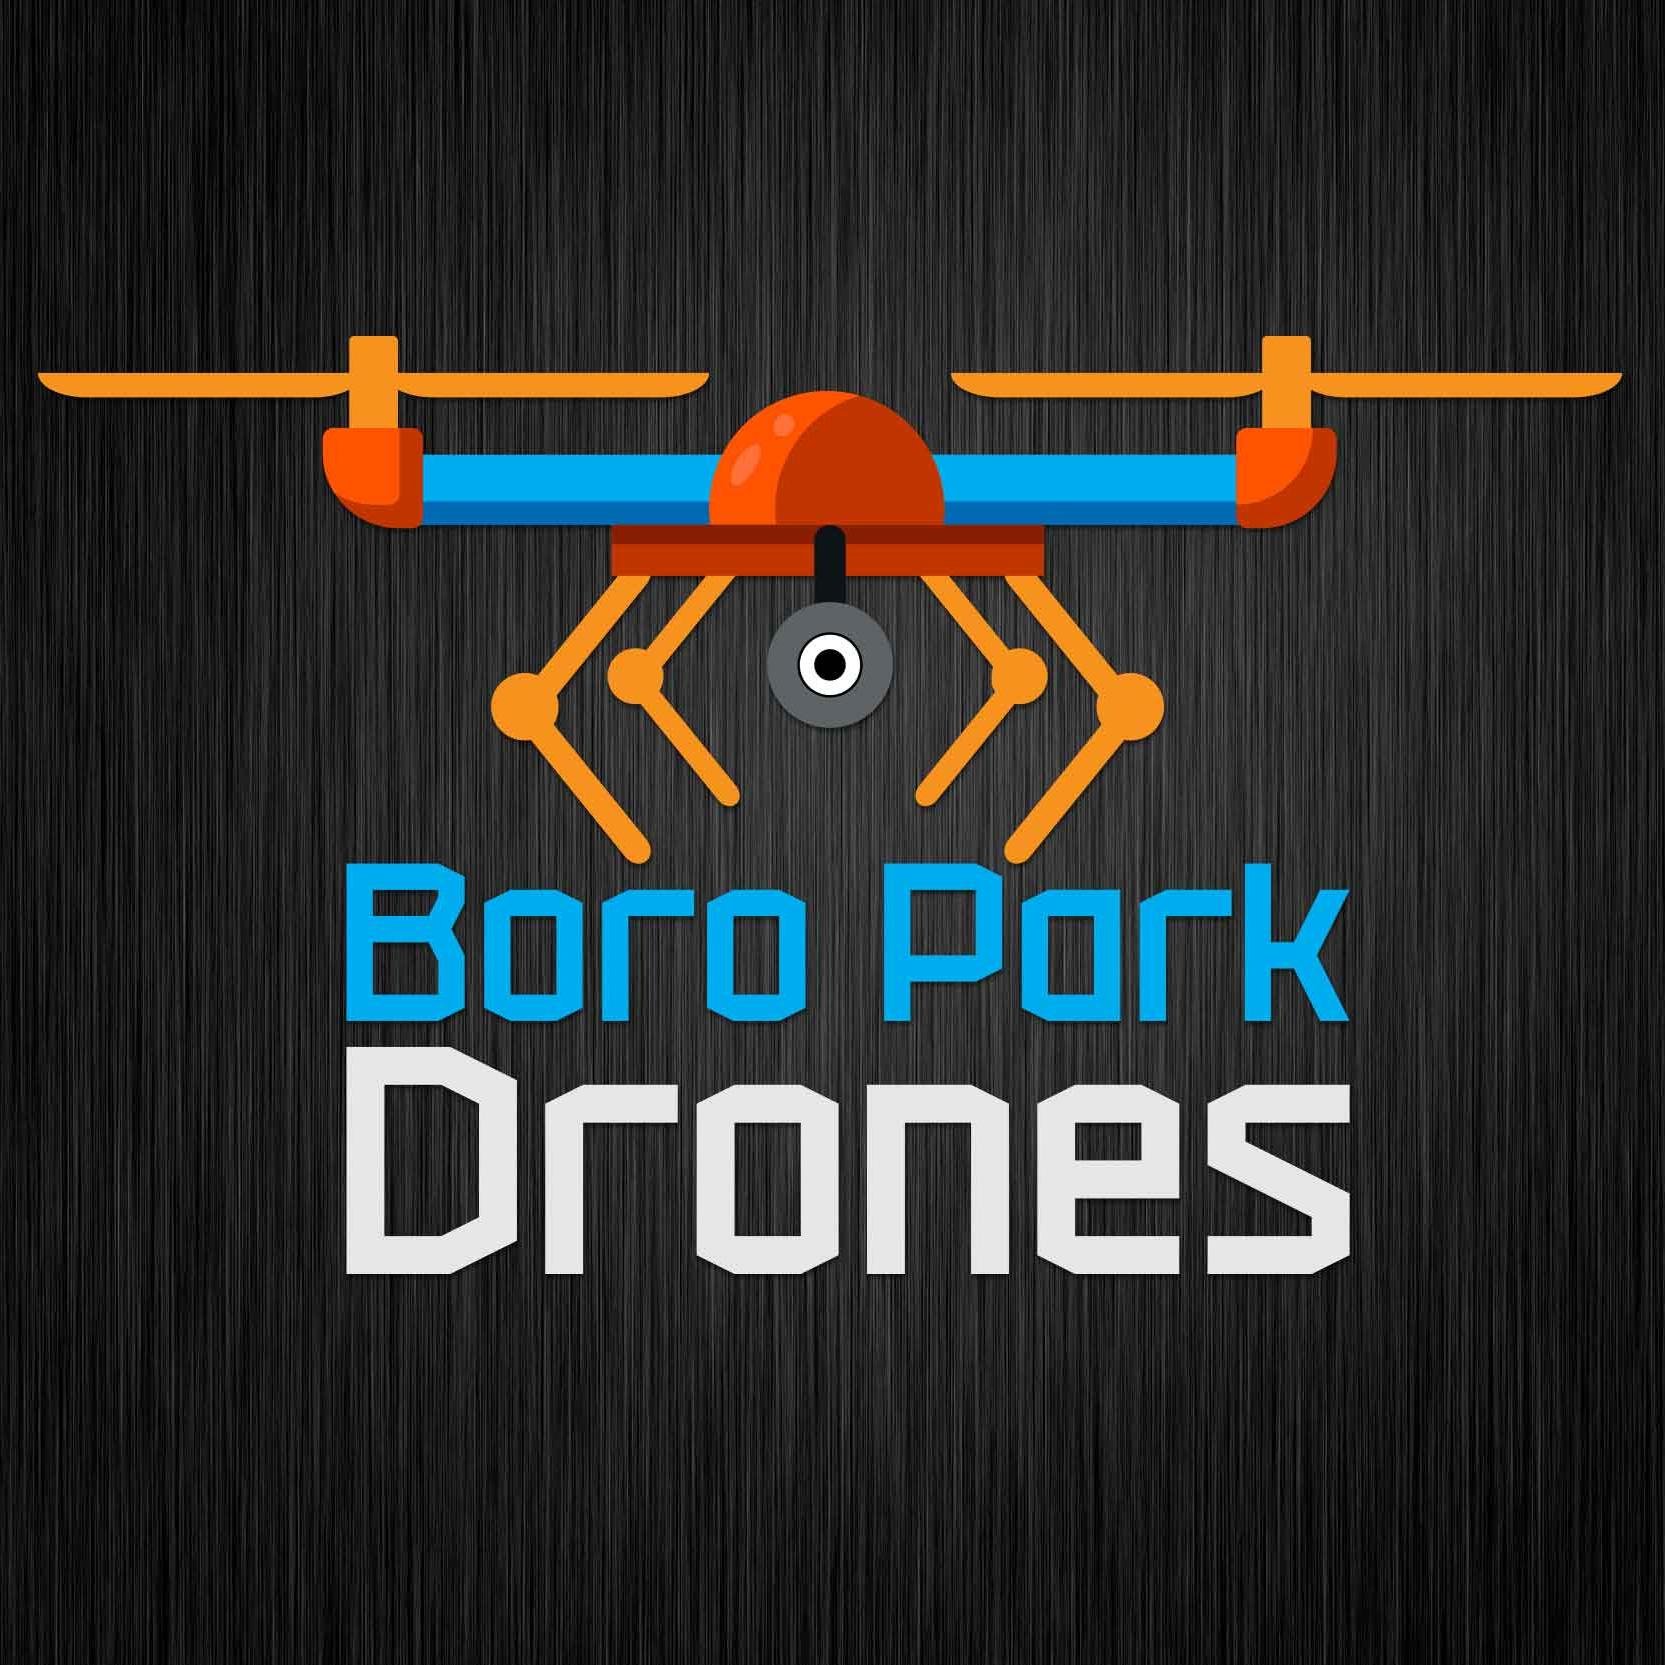 Boro Park drone is an online store offering drones that provides starter drones to advanced stage drones for various activities.